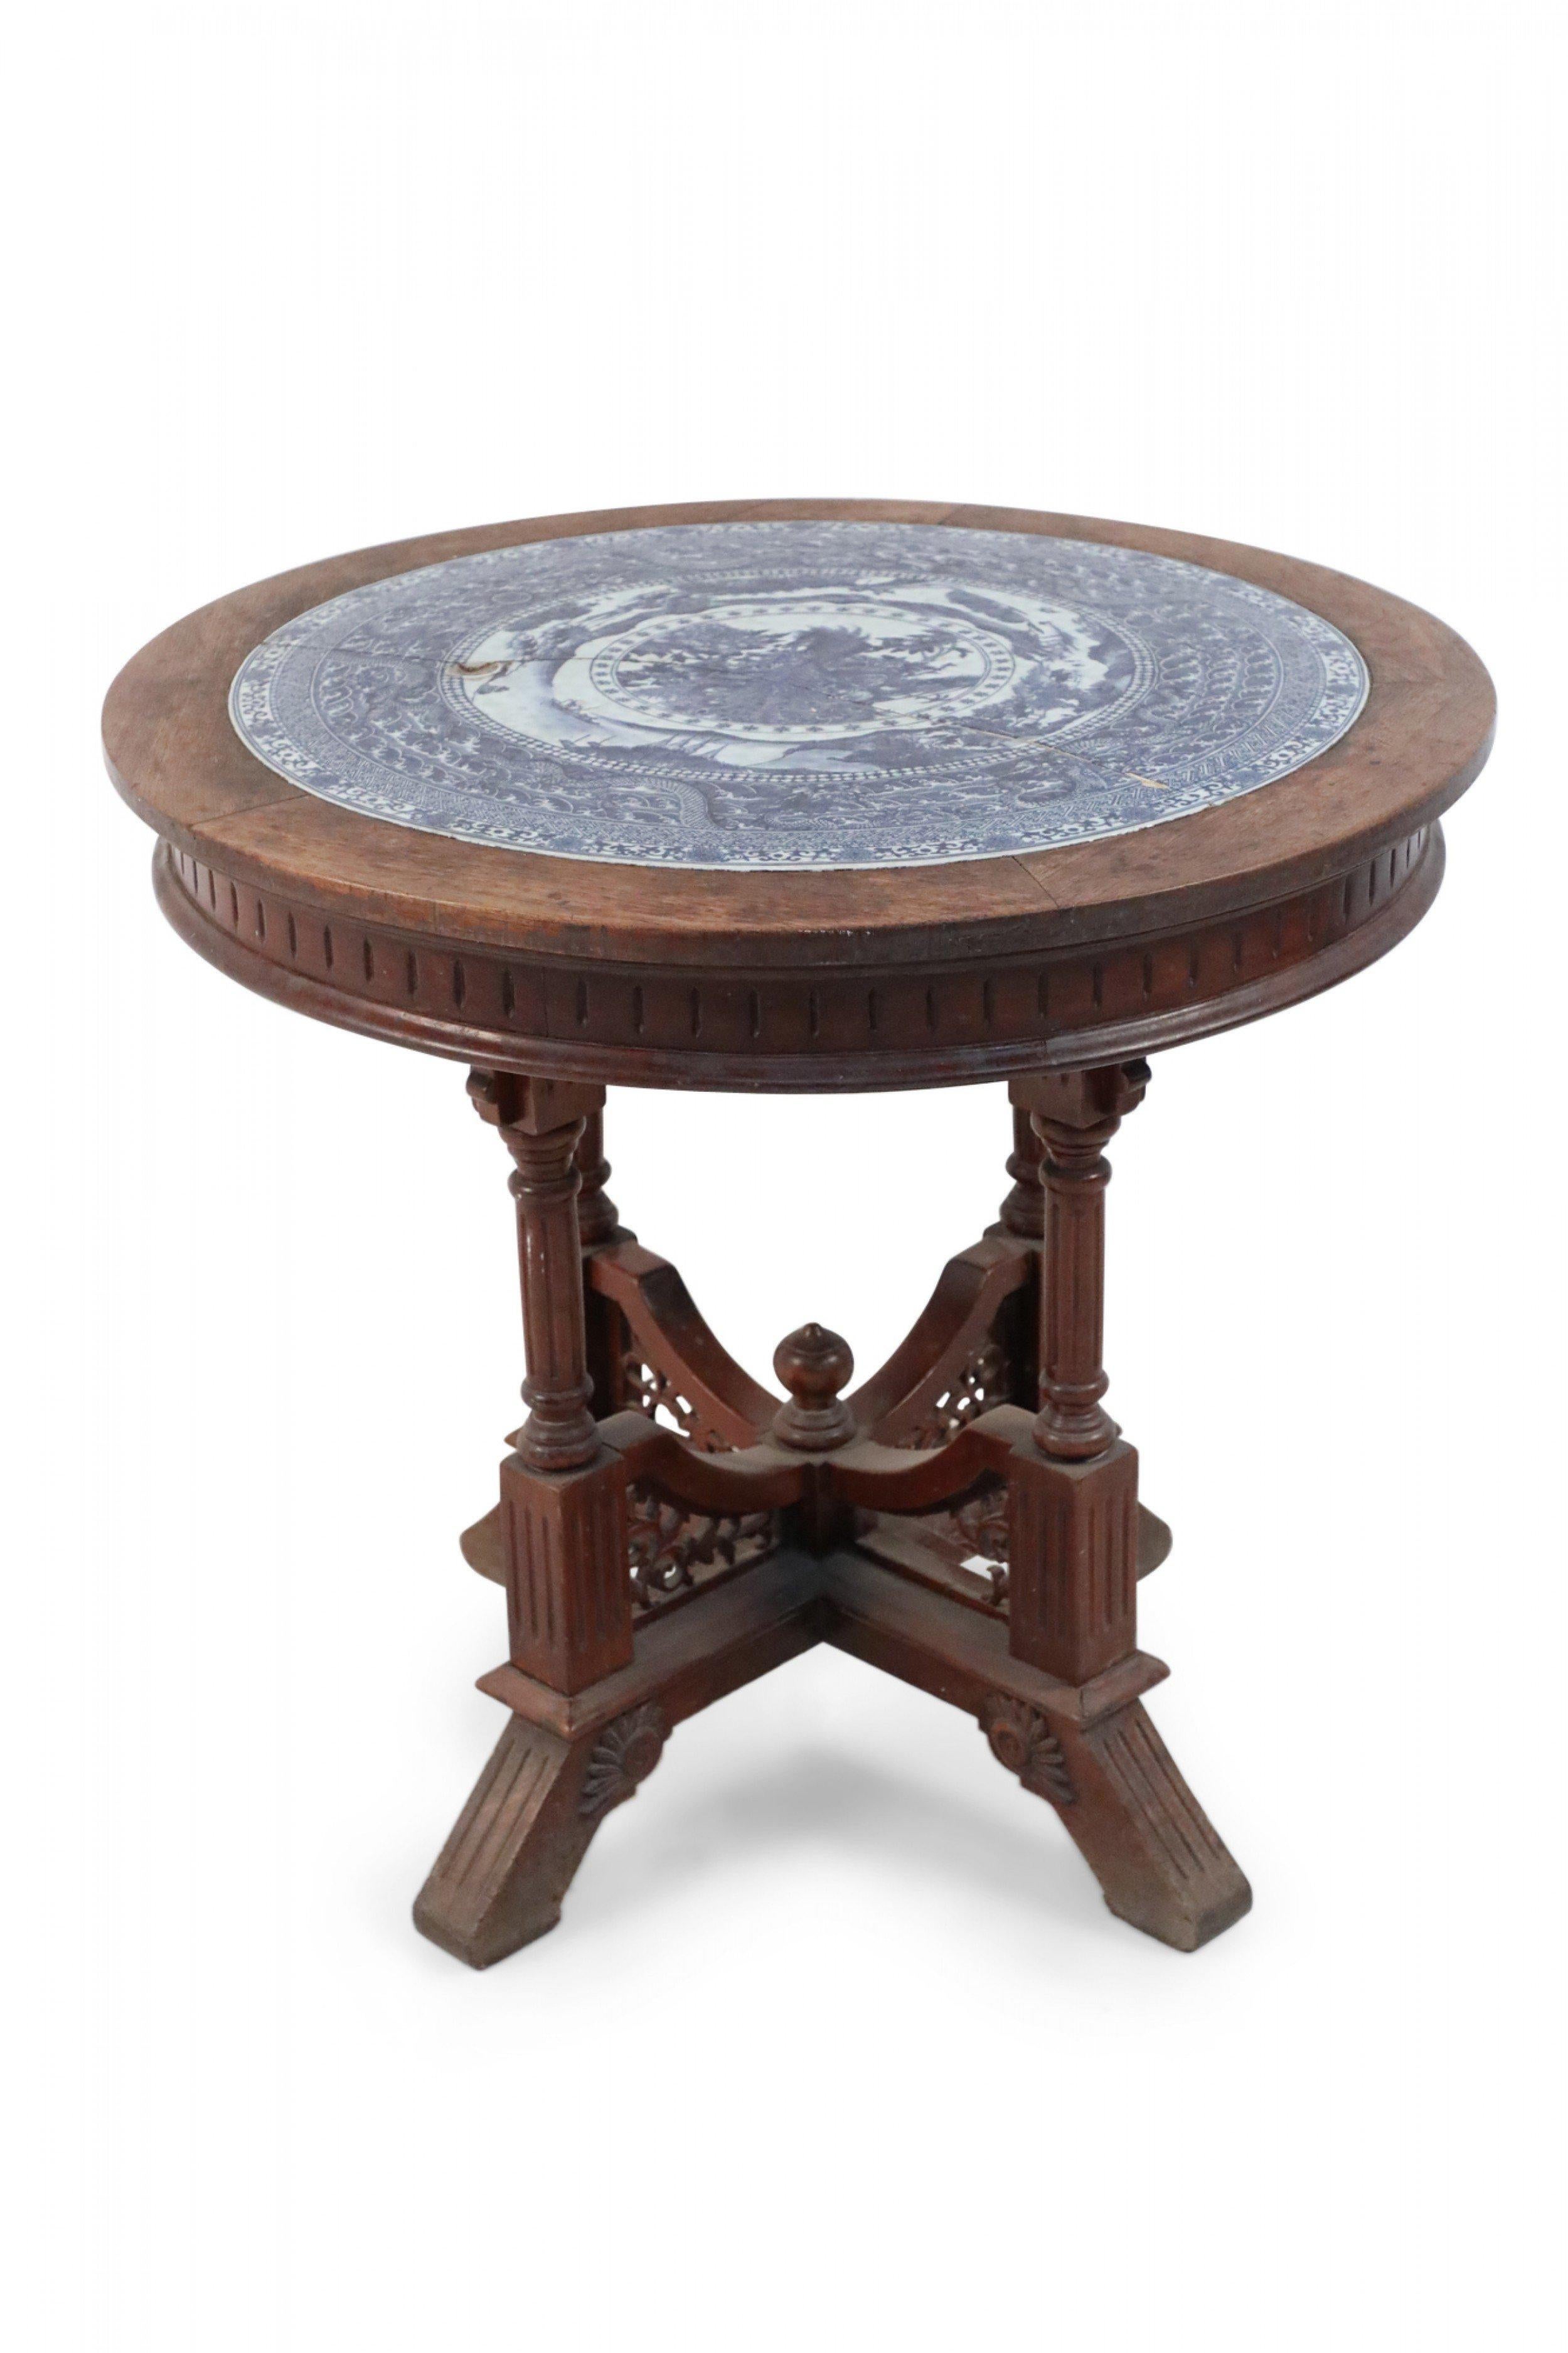 Victorian Aestheticism-style round oak center table having an inset antique, 18th century blue and white porcelain plate (as is) decorated in alternating bands of circular patterns and traditional motifs, atop an incised apron supported on four